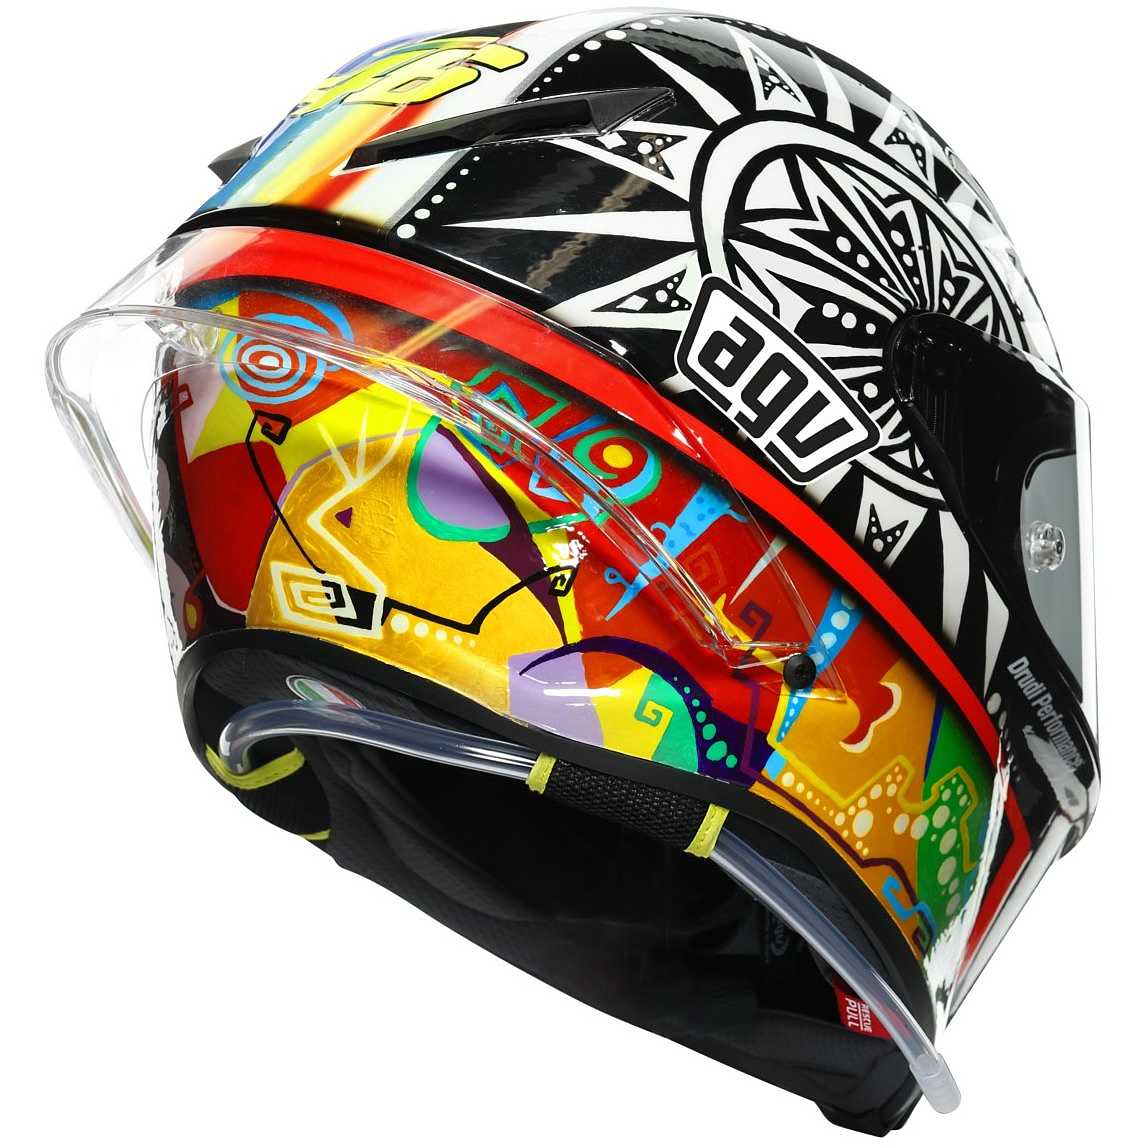 local roto Preocupado Integral Motorcycle Helmet AGV PISTA GP RR Limited Edition "I Caschi Di  Vale" WORLD TITLE 2002 For Sale Online - Outletmoto.eu